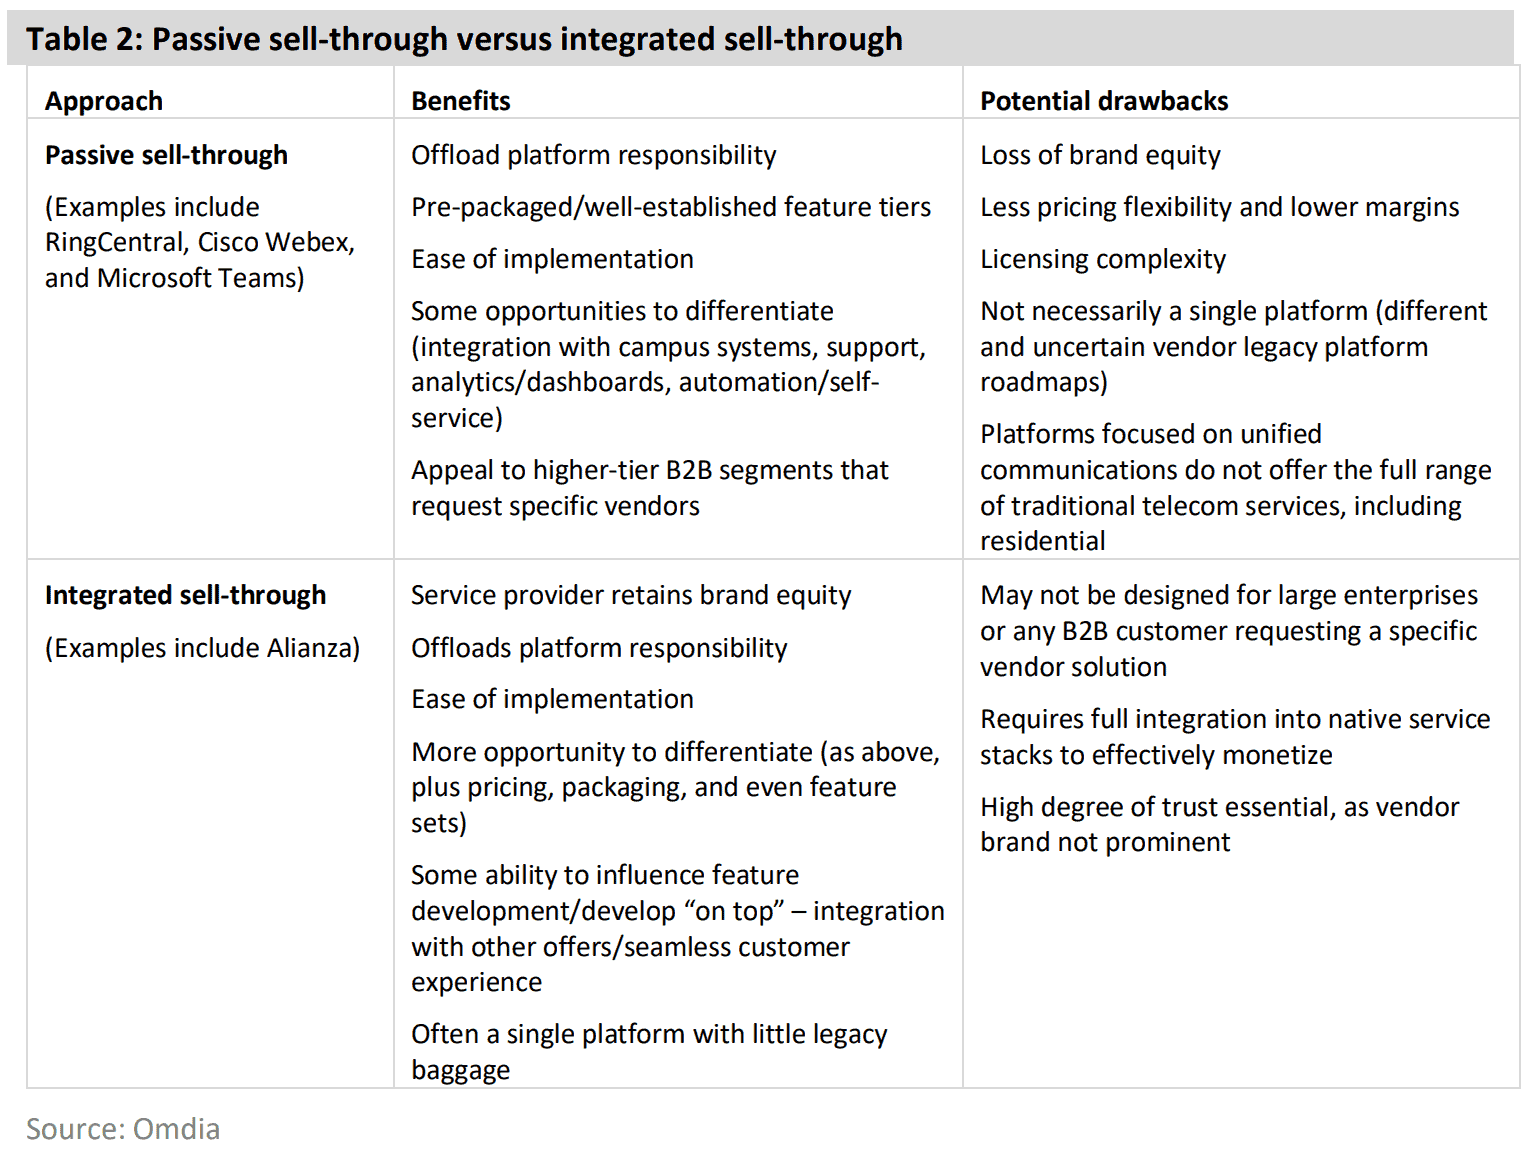 https://www.alianza.com/wp-content/uploads/2024/03/Telco-Passive-Sell-Through-vs-Integrated-Sell-Through.png